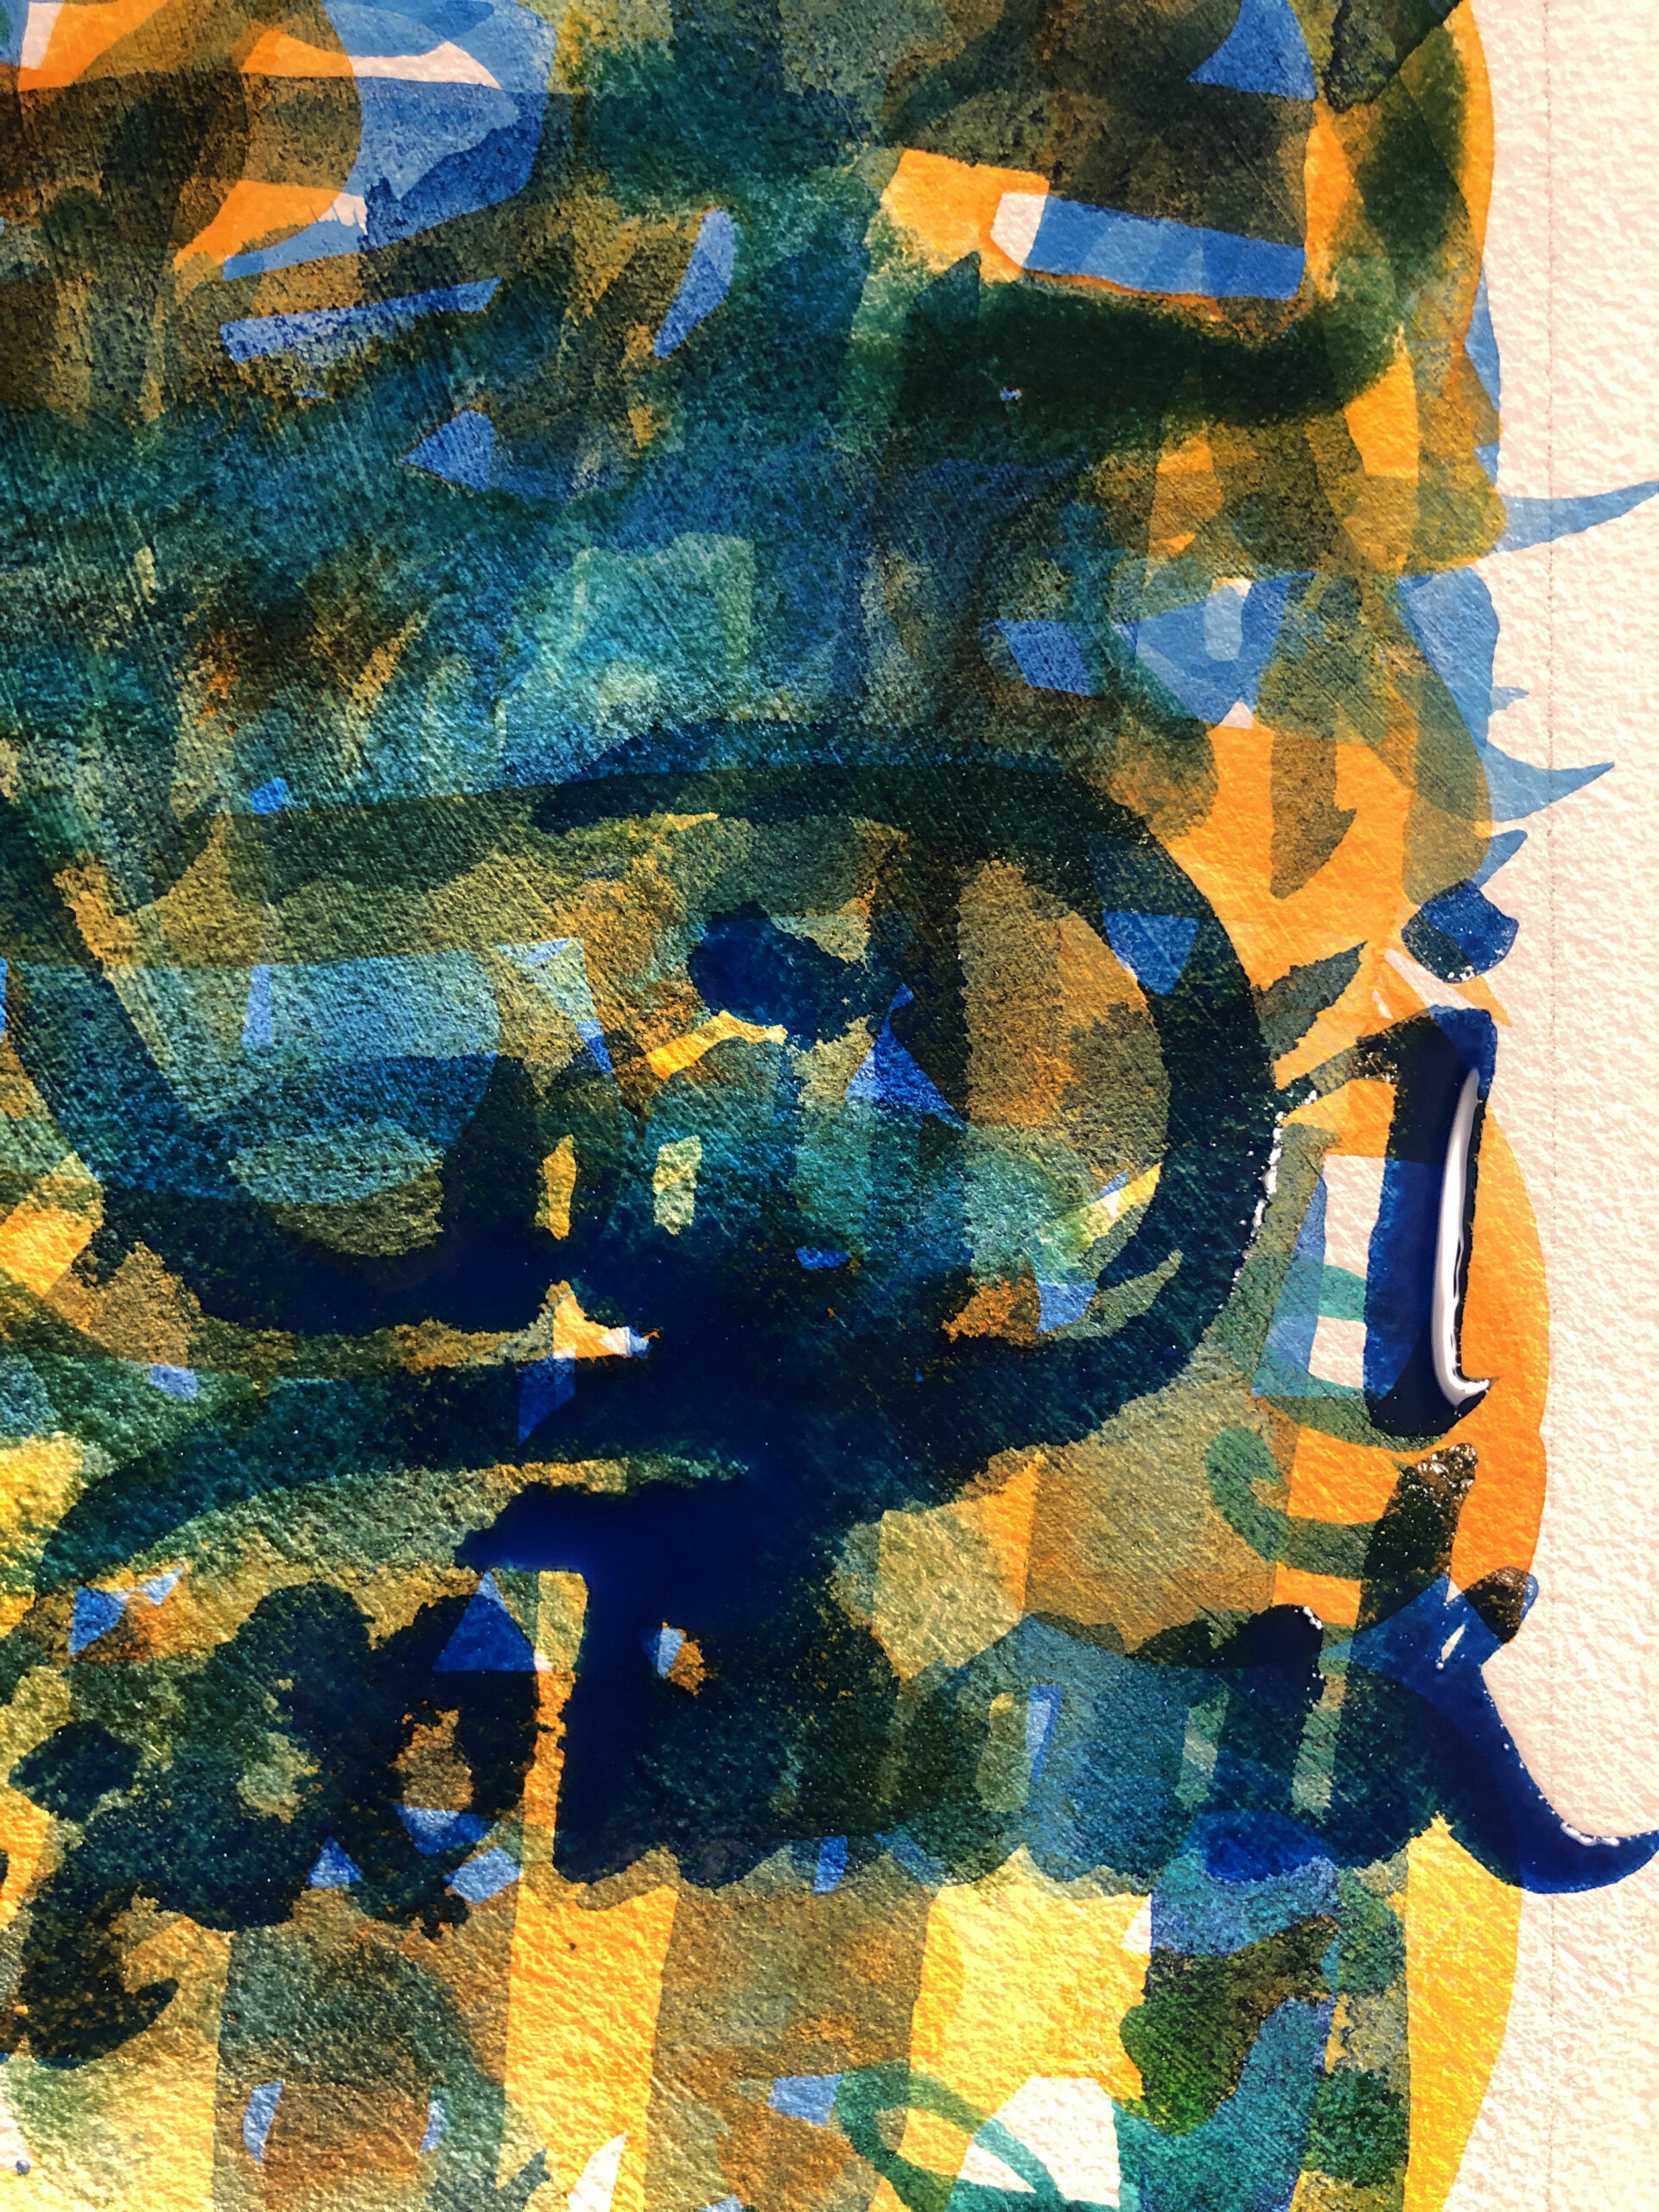 layers of hand lettering in orange, gold, turquoise, and phthalo blue; "Ani Di" "thank" and "nco" are partially legible; "Di" and "nk" are wet and reflect light